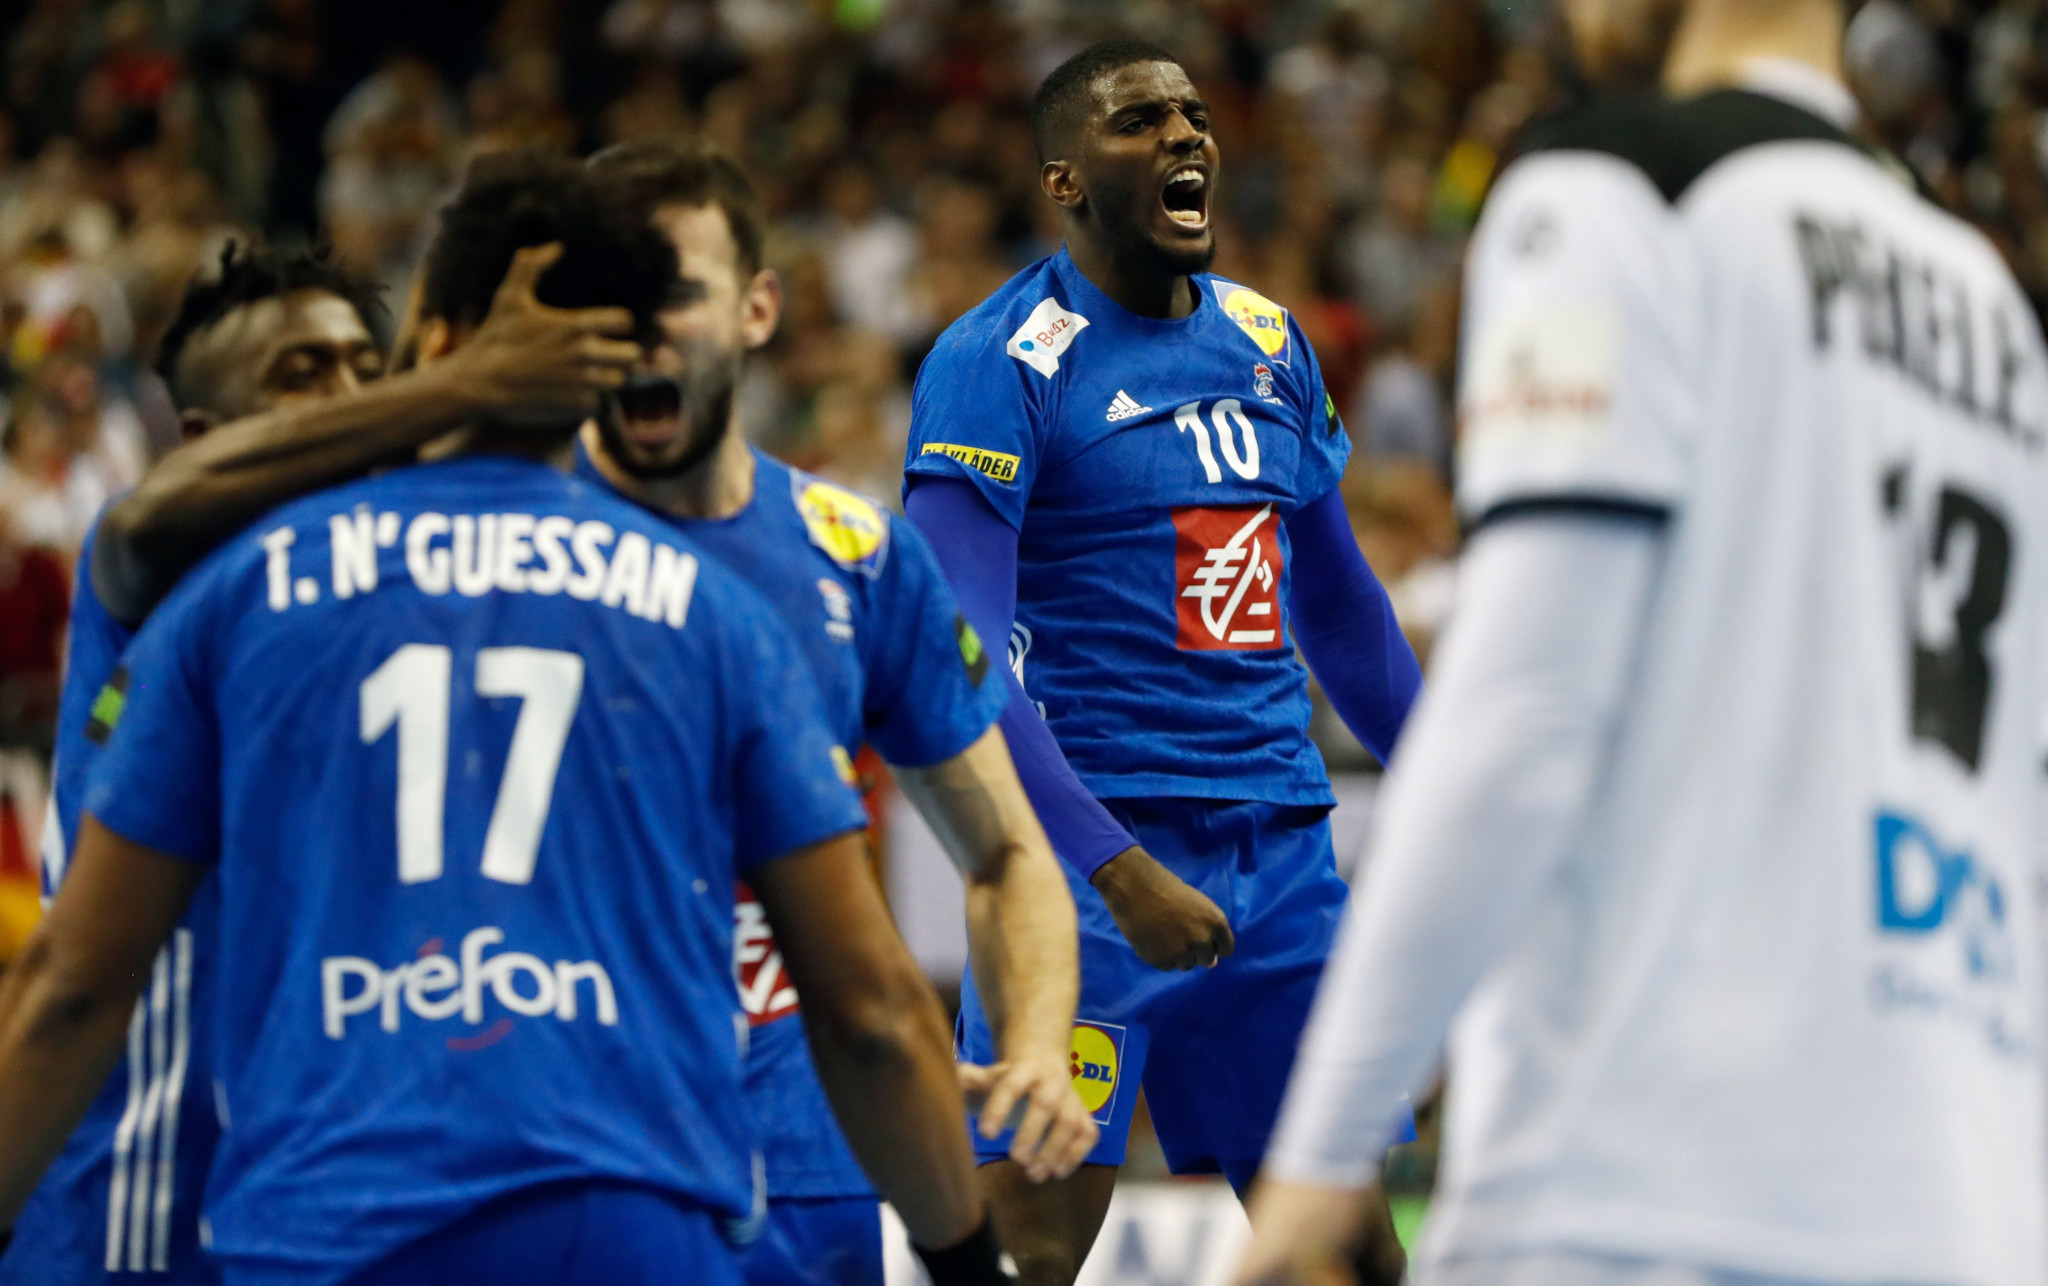 Defending champions strike late to preserve unbeaten record and hand Germany second draw at IHF Men's Handball World Championship